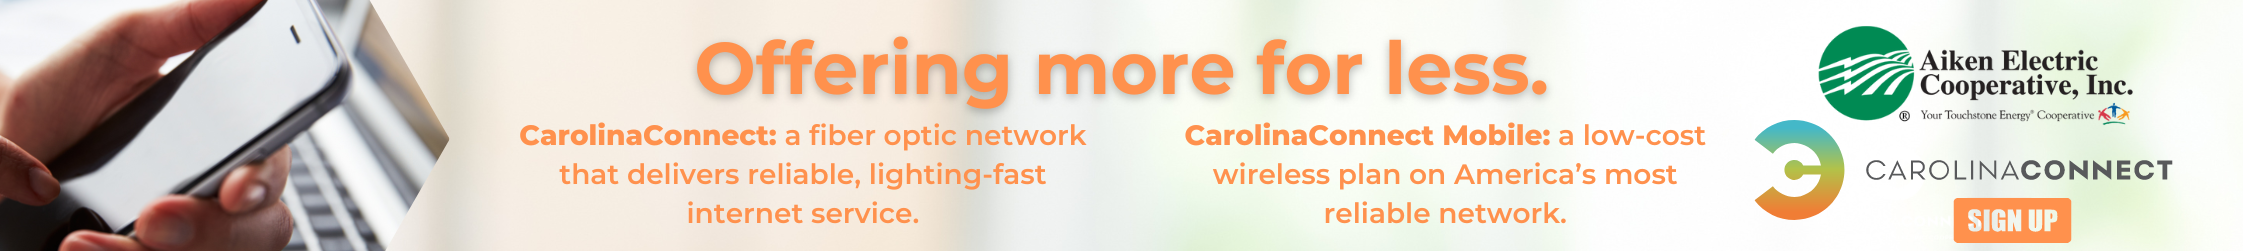 Offering more for less. Carolina Connect, a fiber optic network and CarolinaConnect Mobile, a low-cost wireless plan.